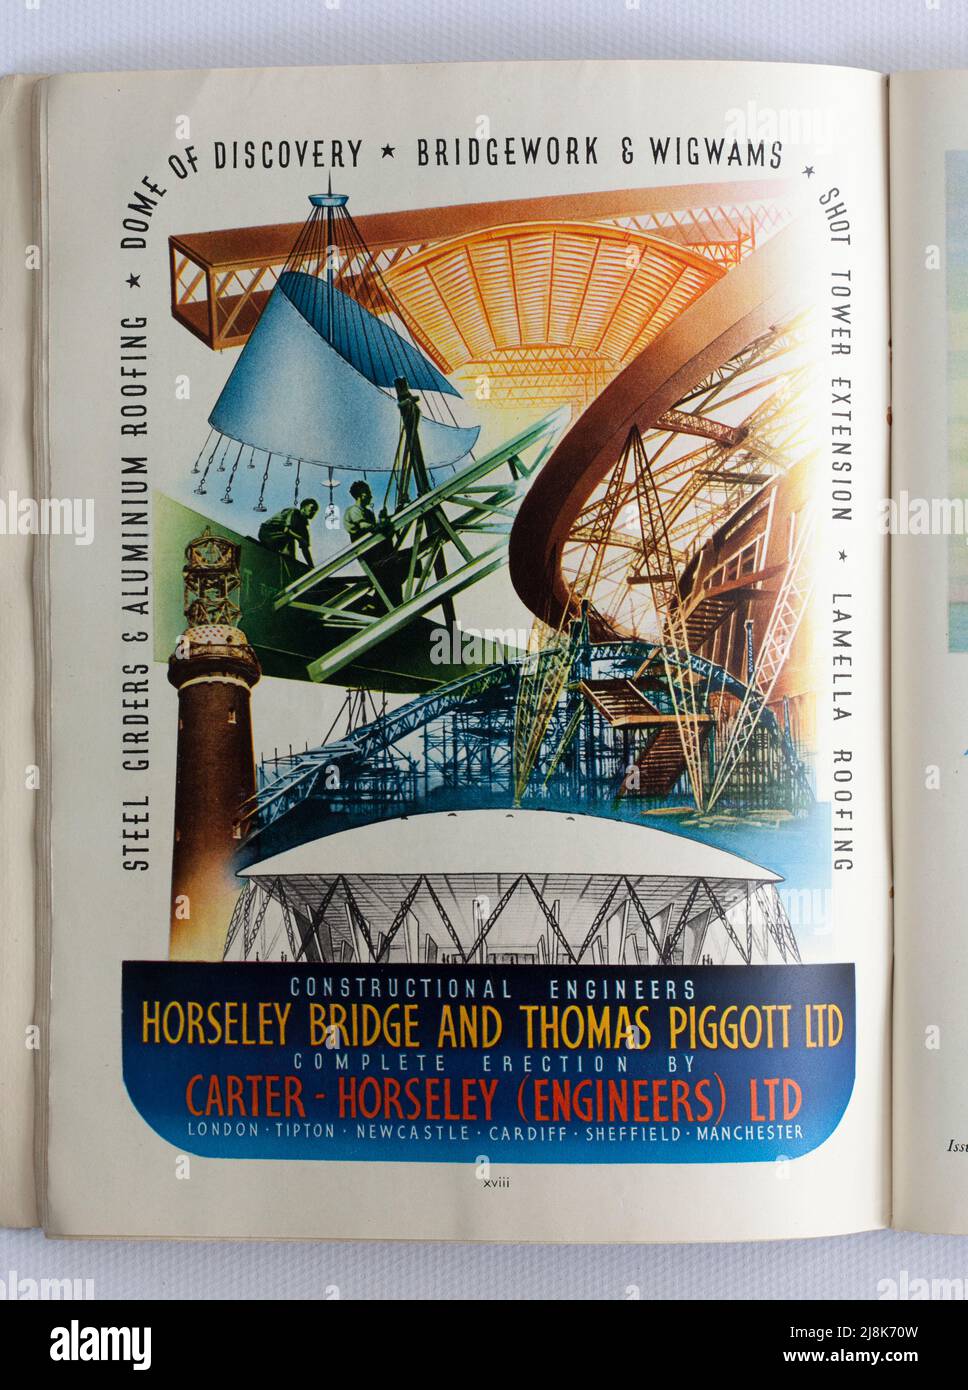 Old 1950s British Advertising for Constructional Engineers Banque D'Images